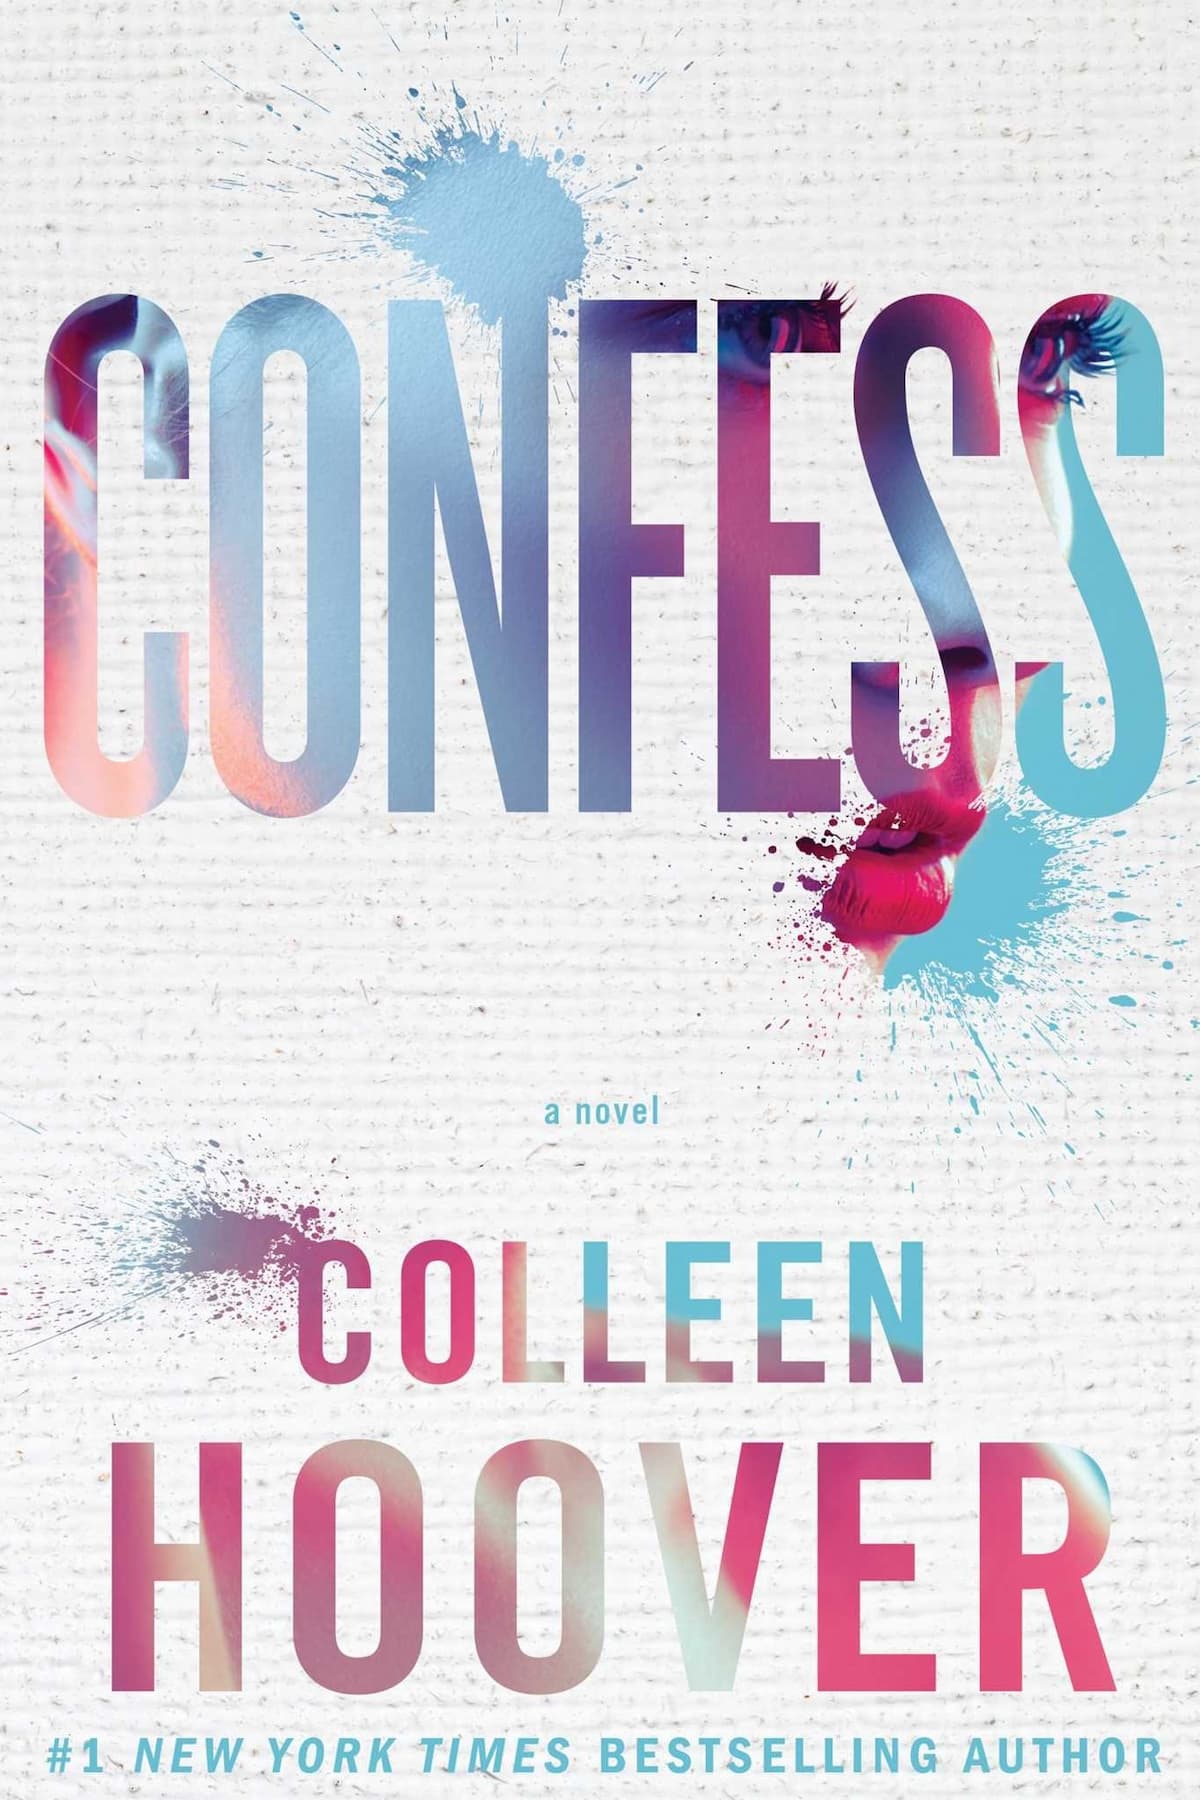 Colleen Hoover Books In Order, Contemporary Romance, Fiction, New Adult Romance, Romance, Women's Fiction, Confess – Colleen Hoover